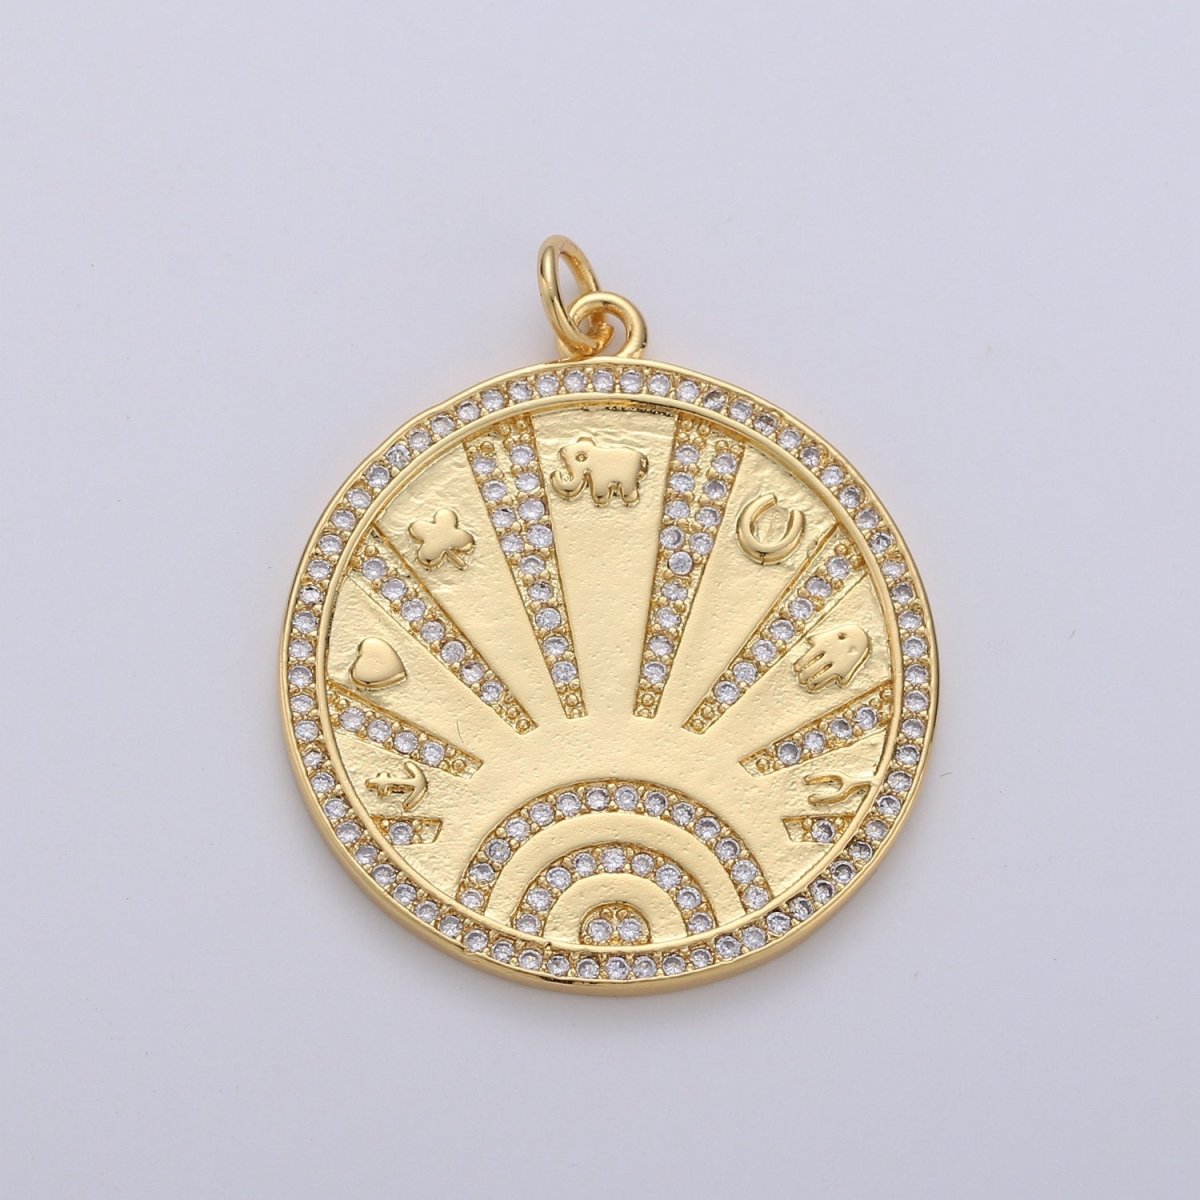 New Gold Lucky Coin Talisman Charm Necklace, 14k Gold Filled Disc Round Pendant Lucky Medallion Pendant for Necklace Jewelry Making Supply D-339 - DLUXCA